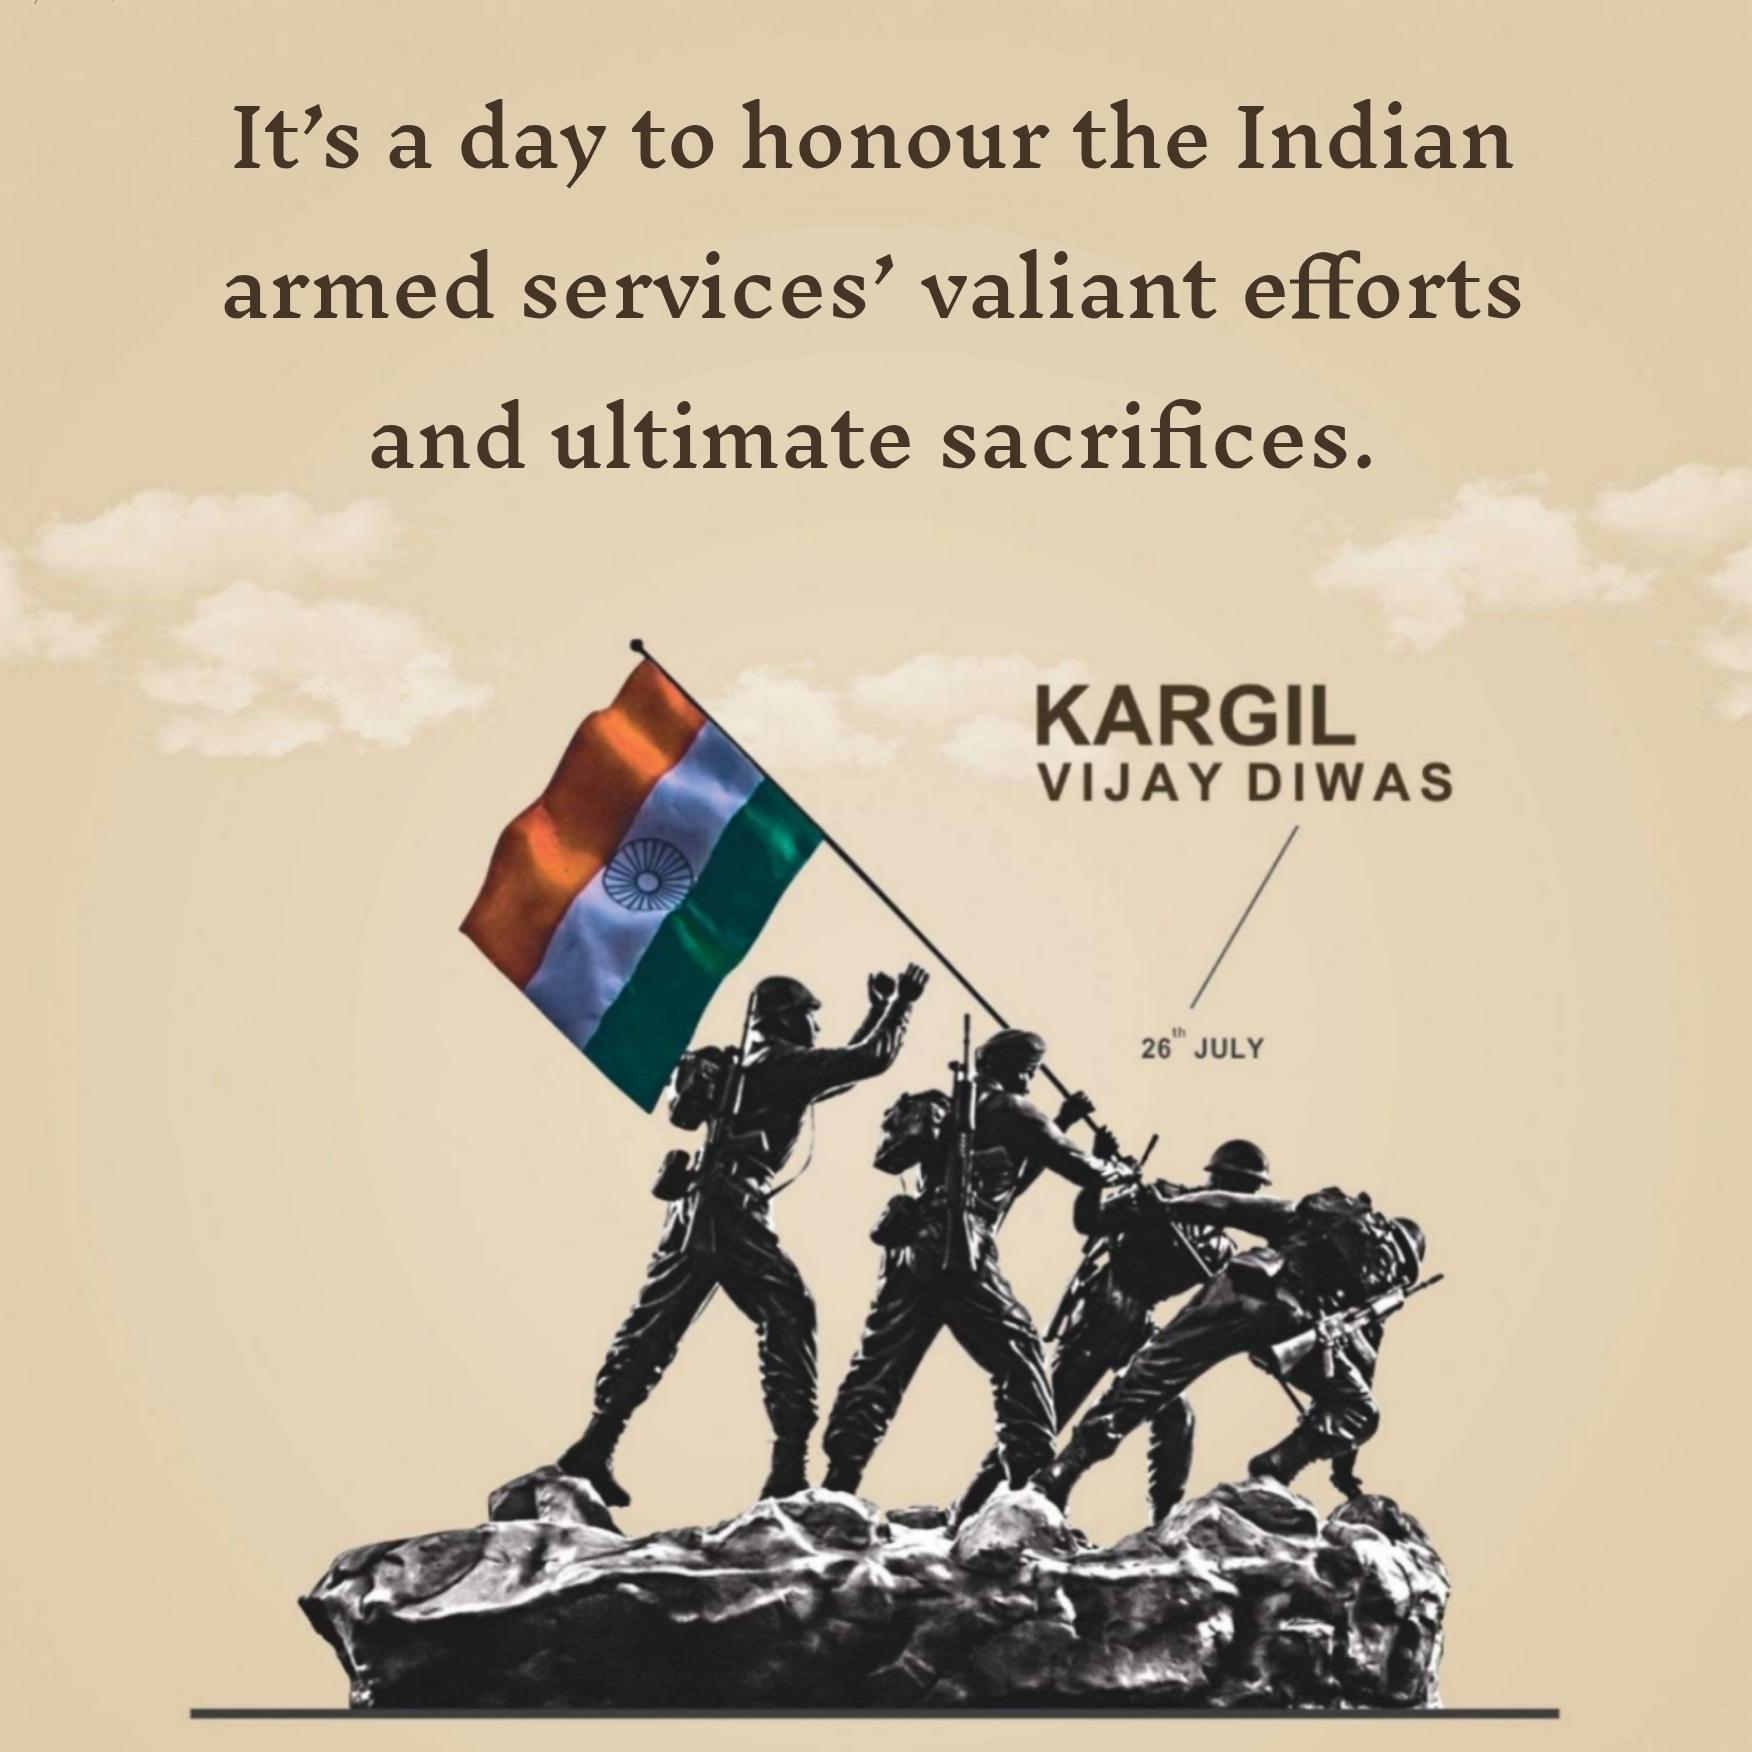 Its a day to honour the Indian armed services valiant efforts